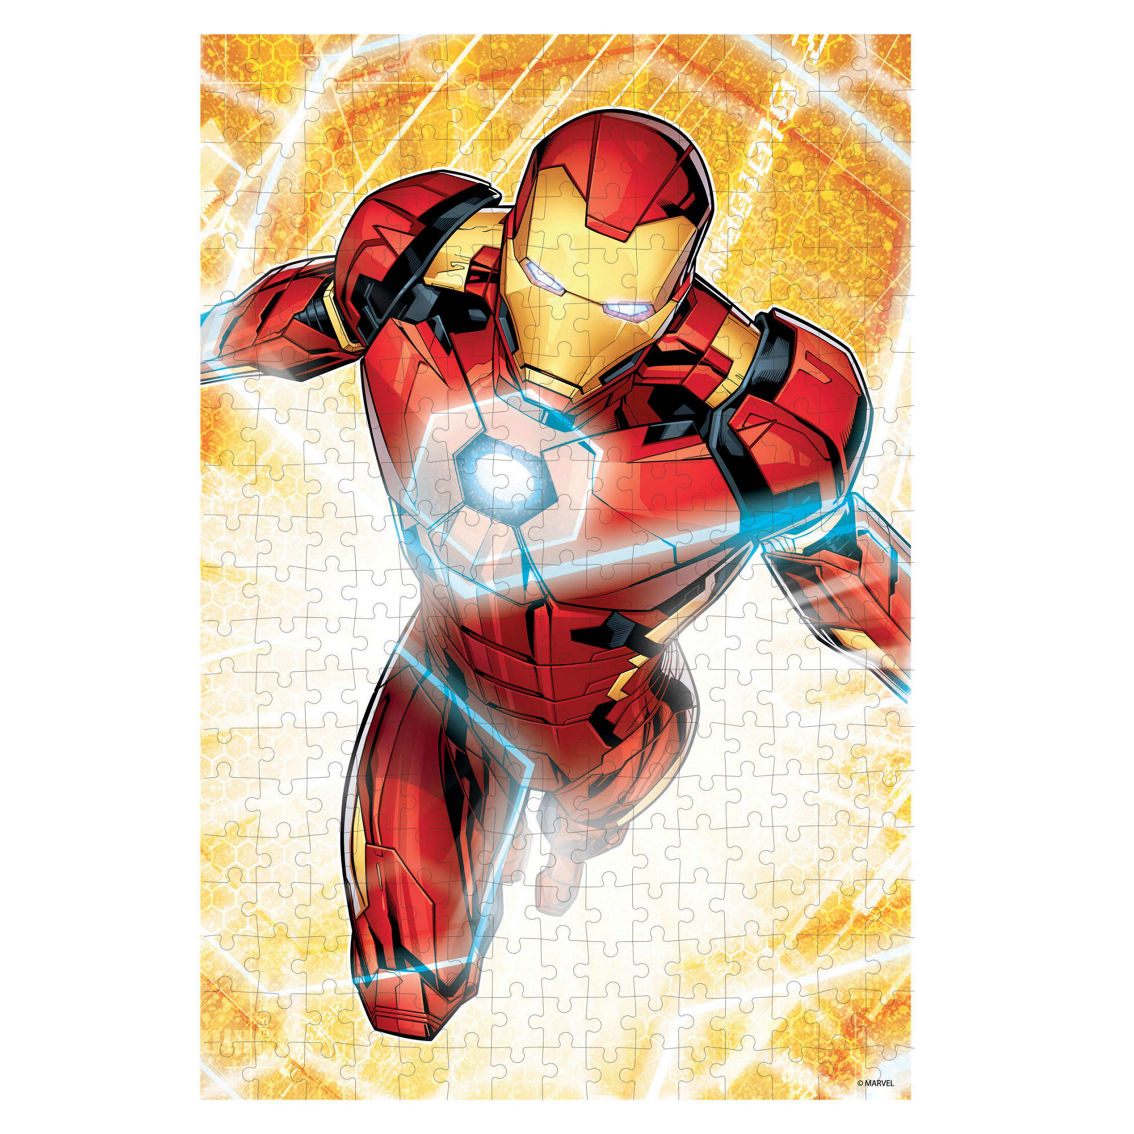 Prime 3D Marvel Avengers Iron Man 3D Lenticular Puzzle in a Shaped Tin: 300 Pcs - Image 4 of 5